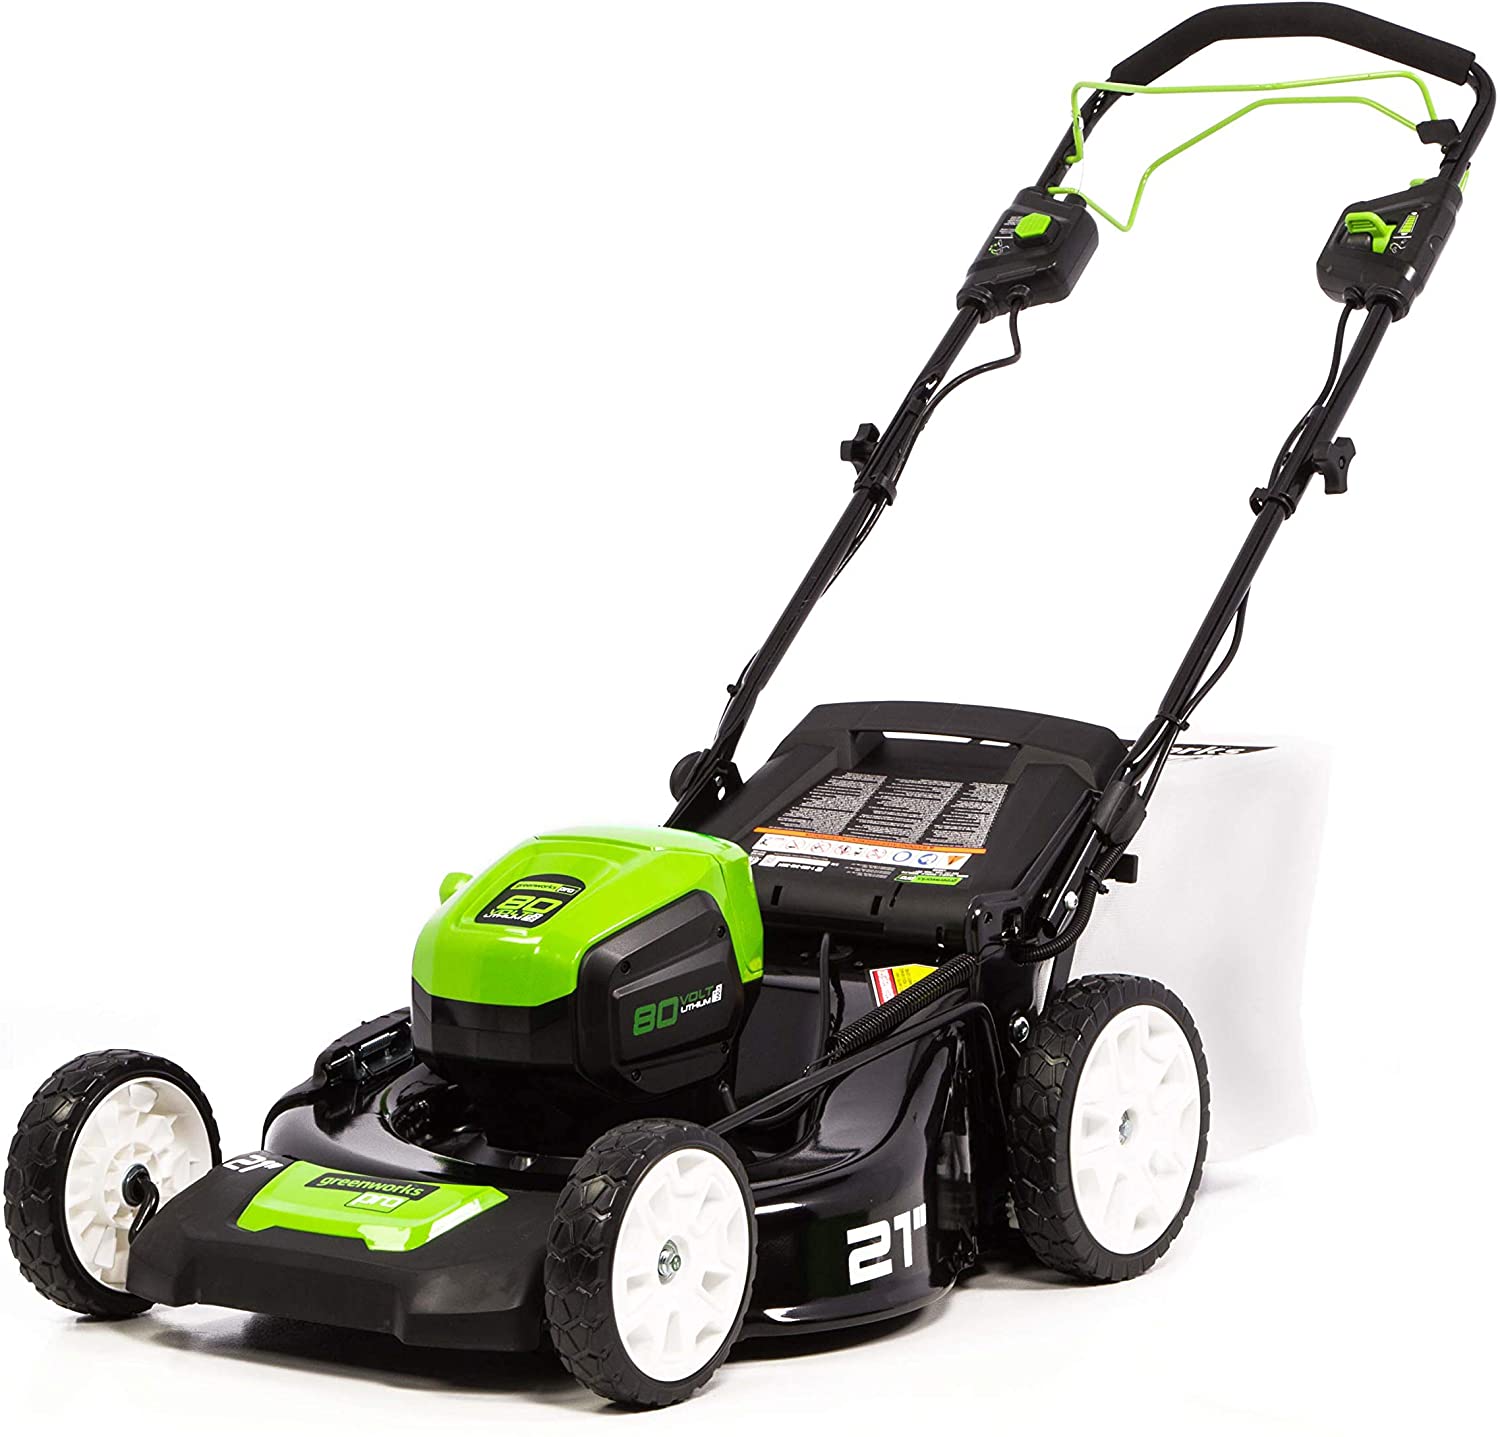 Greenworks PRO 80V Self-Propelled Cordless Lawn Mower, 21-Inch